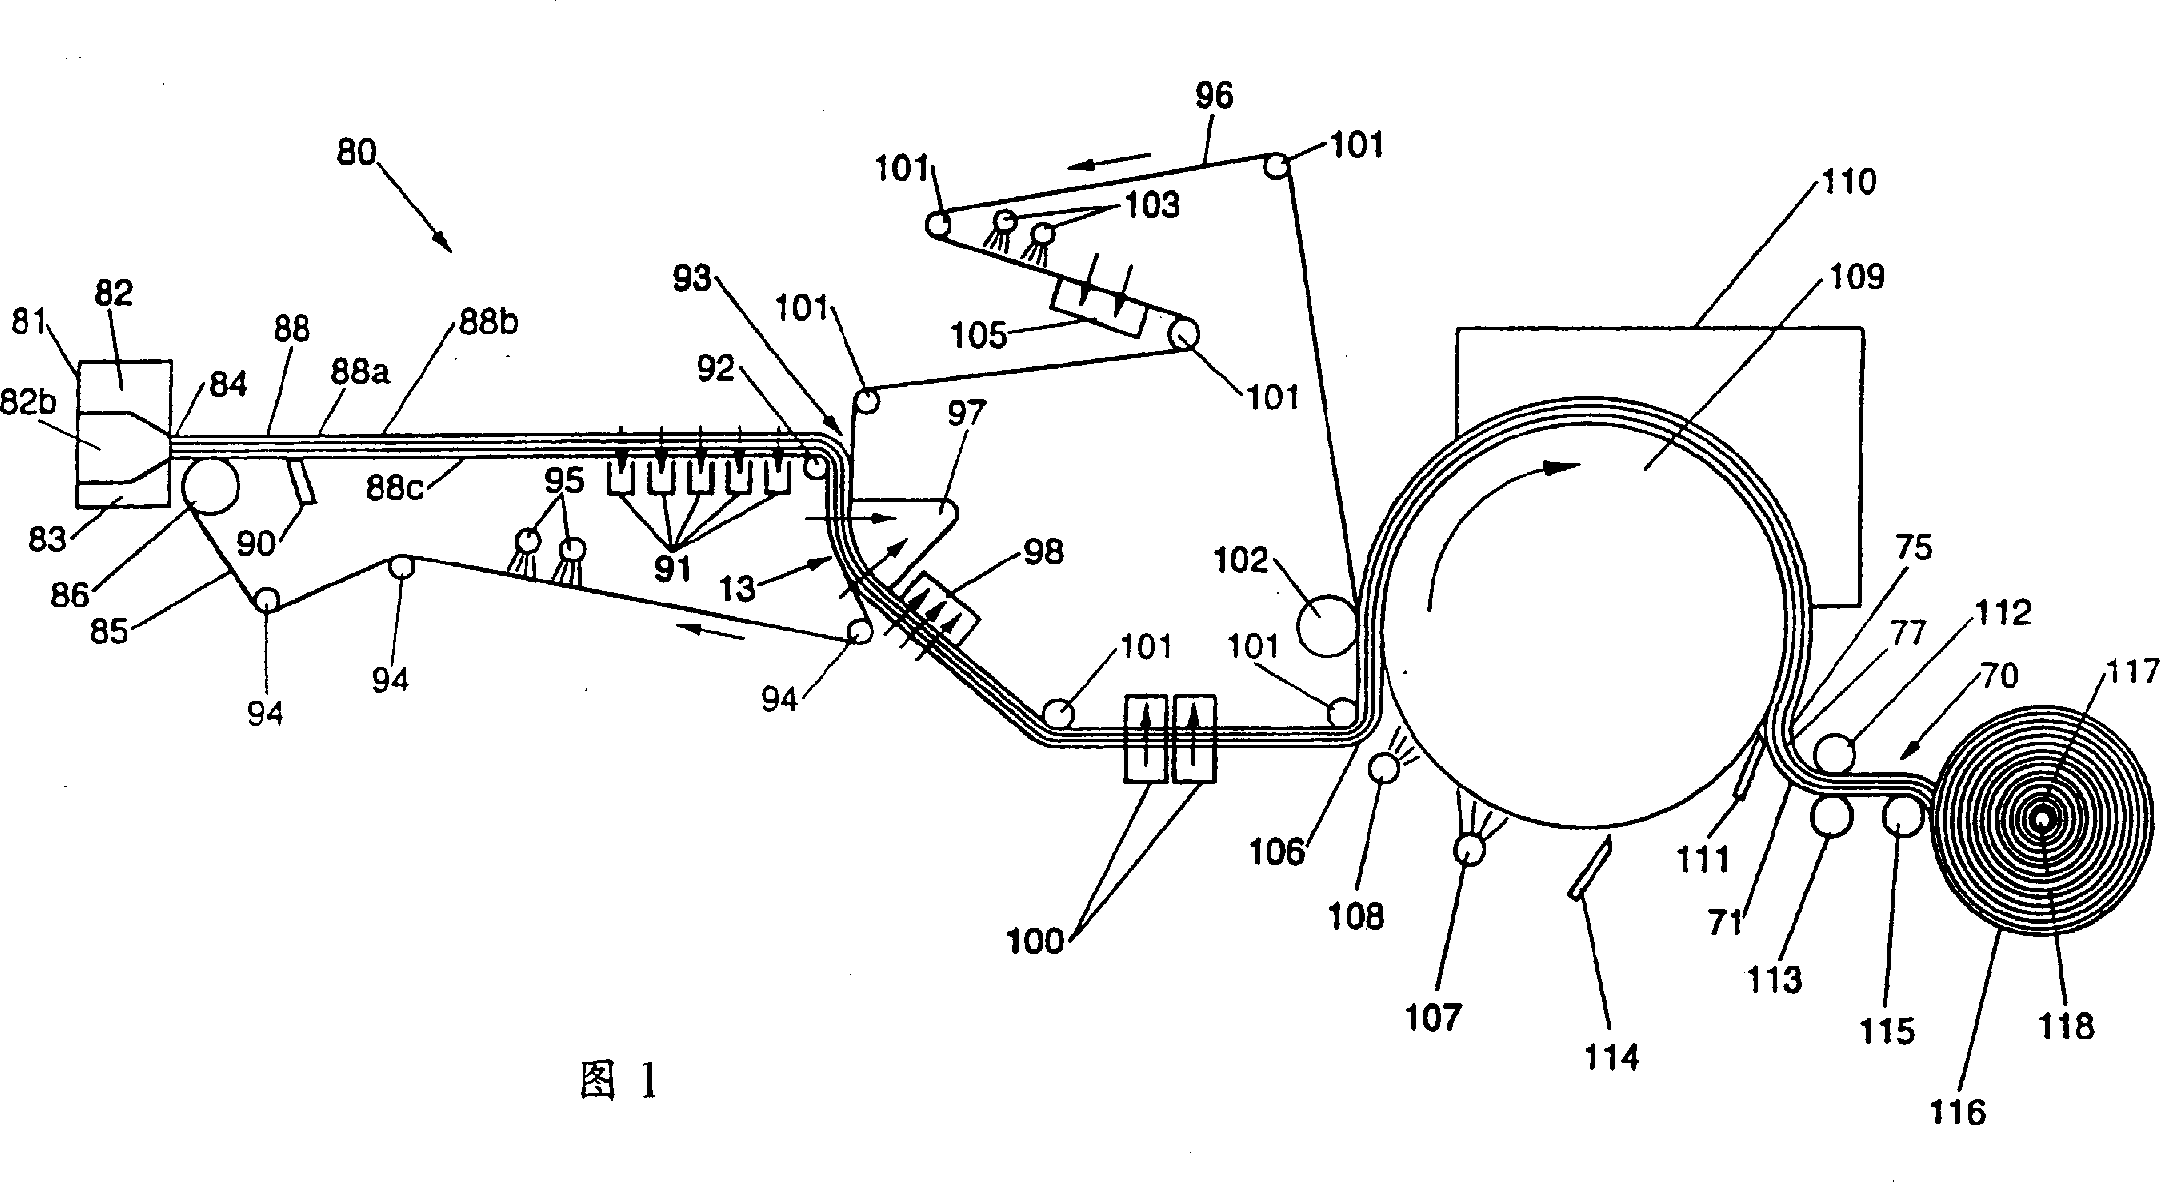 Creping adhesive and process for creping tissue paper